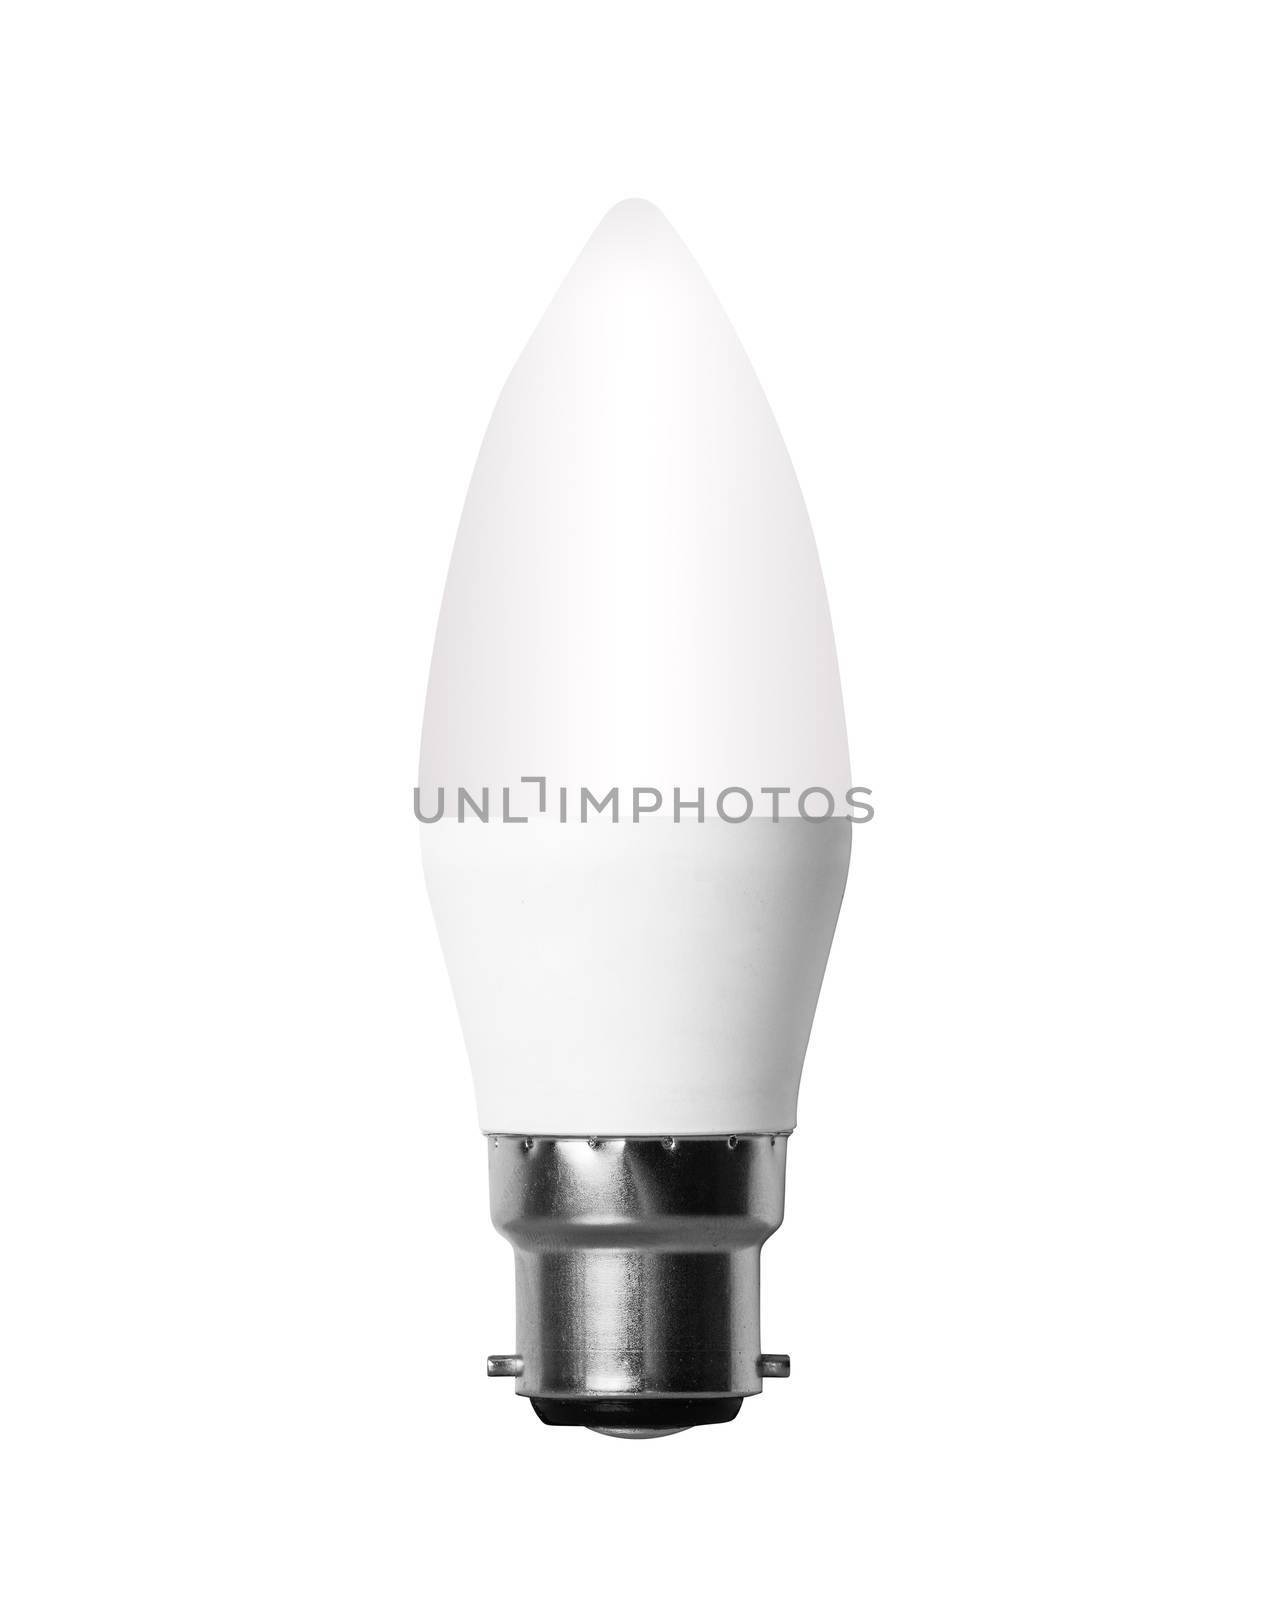 Isolated LED candle bulb with bayonet connector for UK style lamps by steheap